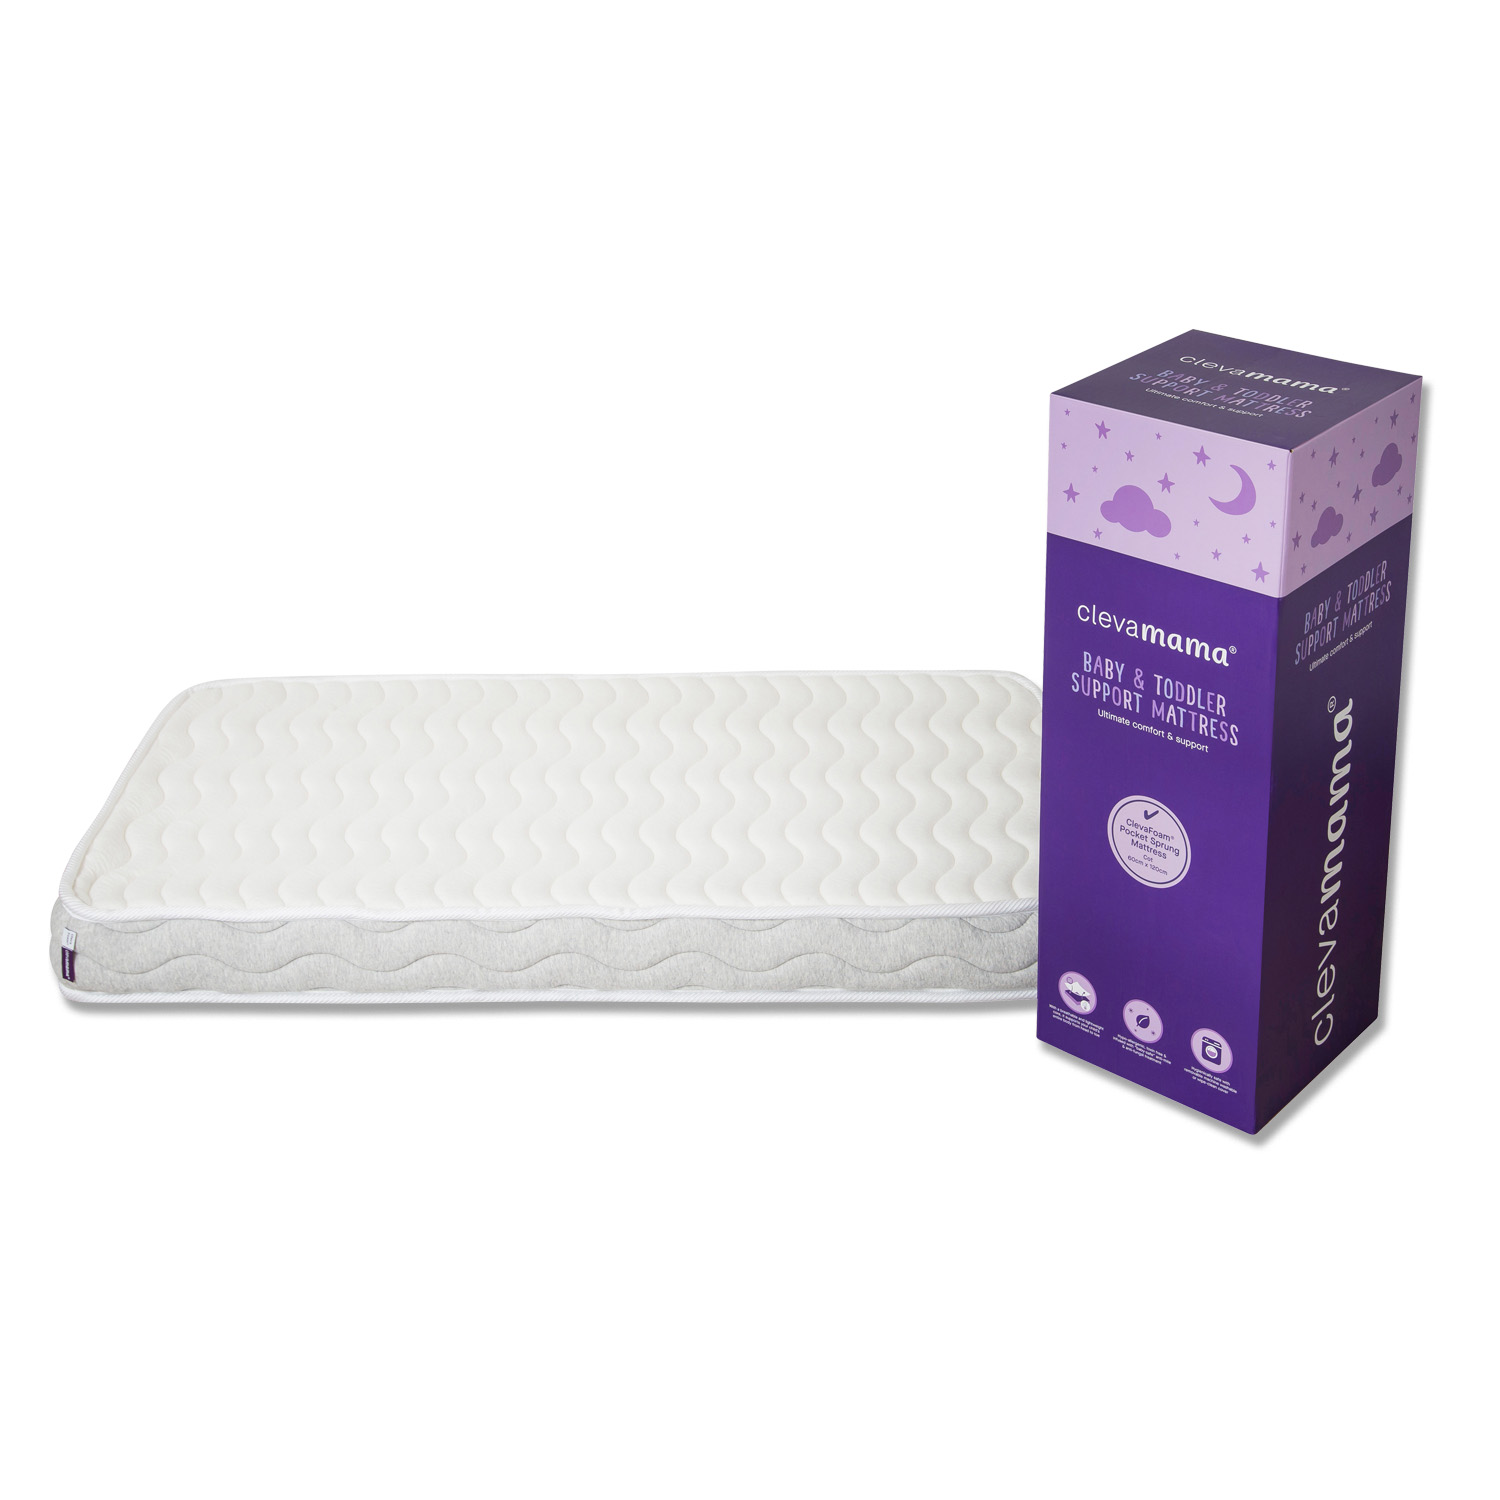 Clevamama ClevaFoam Pocket Sprung Mattress (Various Sizes Available)